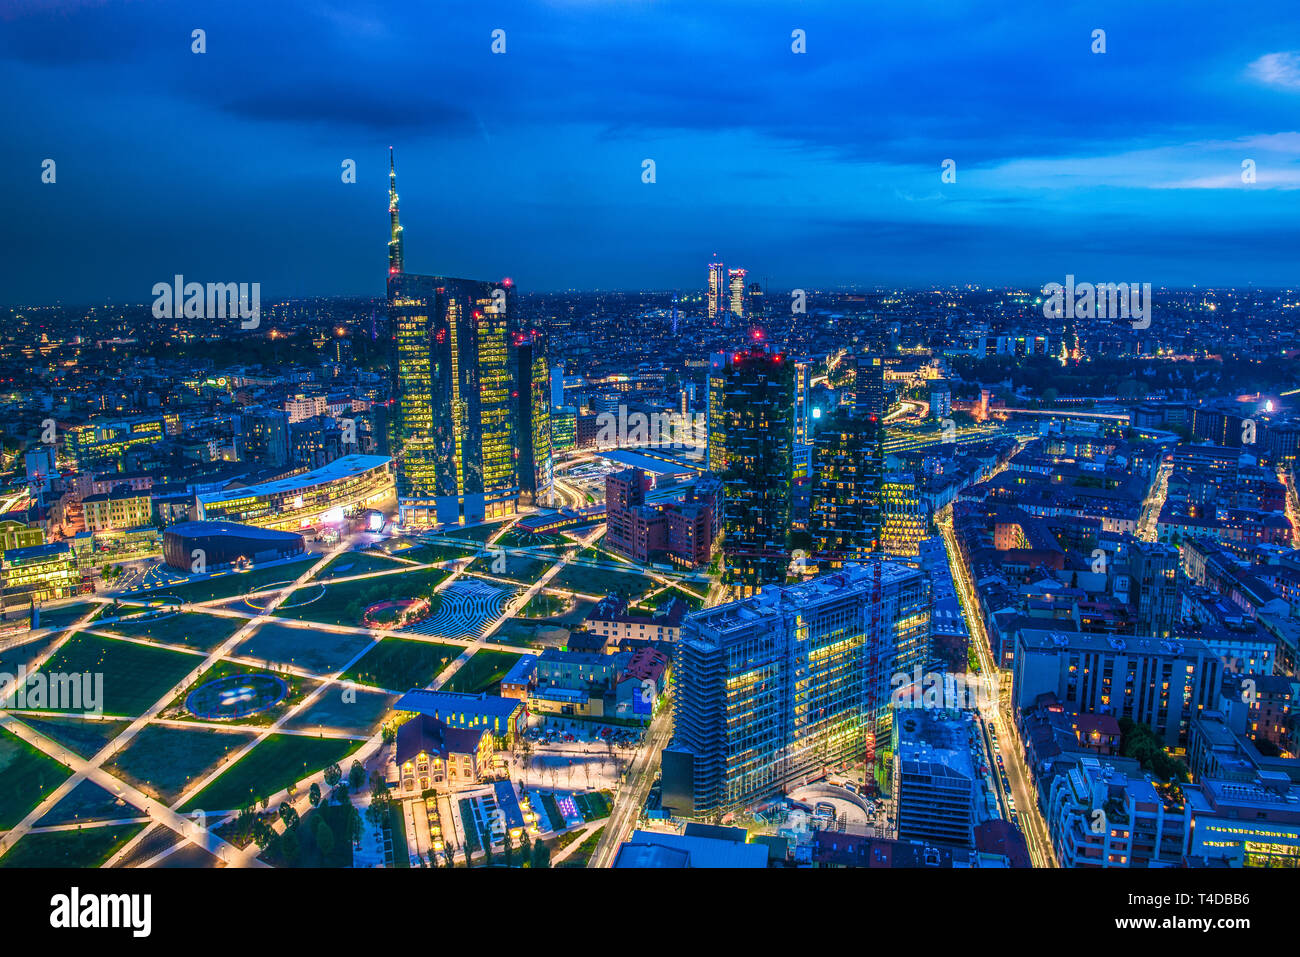 milan skyline overlooking the island from above Stock Photo